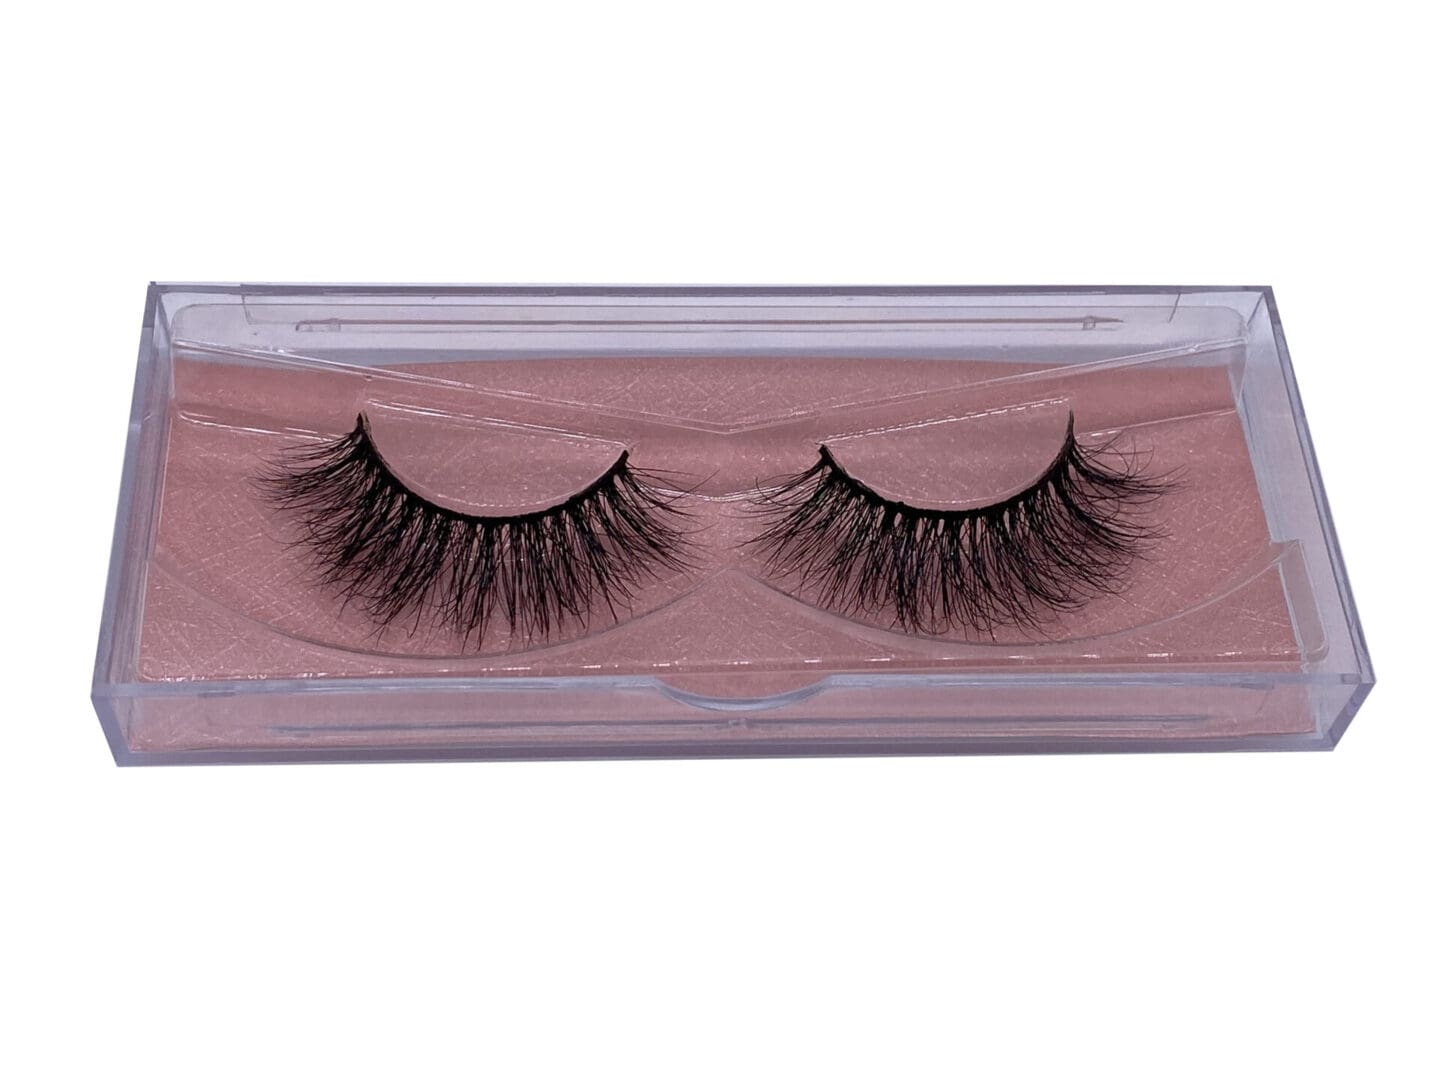 A pair of false eyelashes in a case.